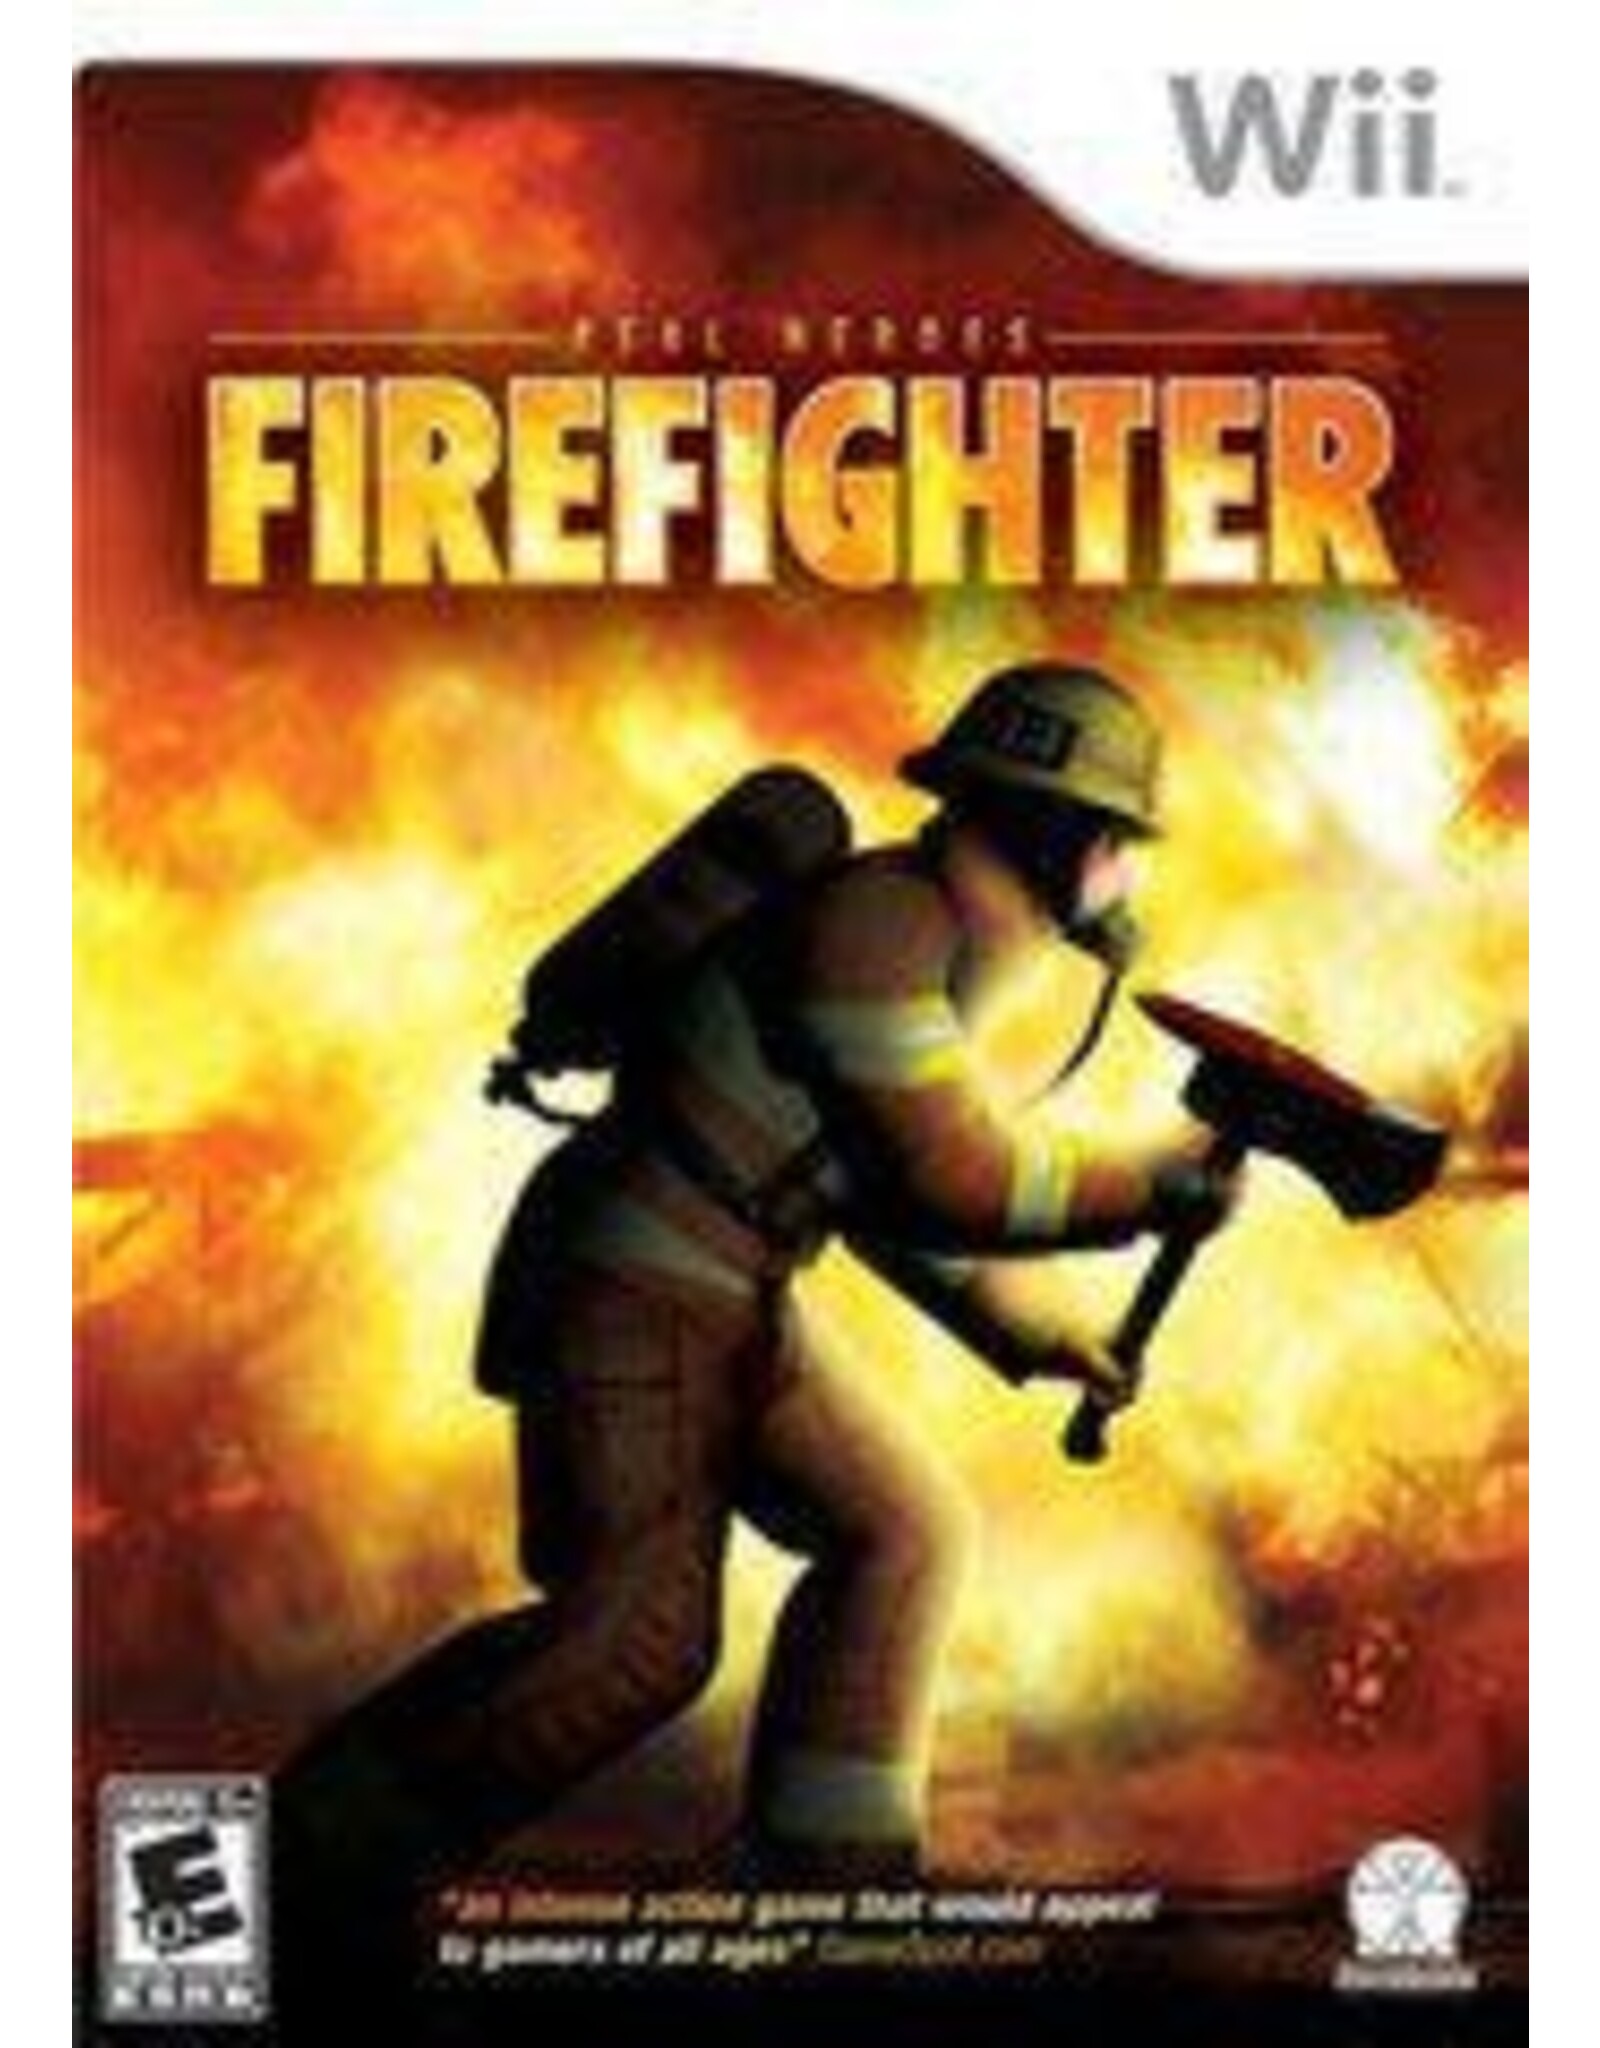 Wii Real Heroes: Firefighter (CiB)